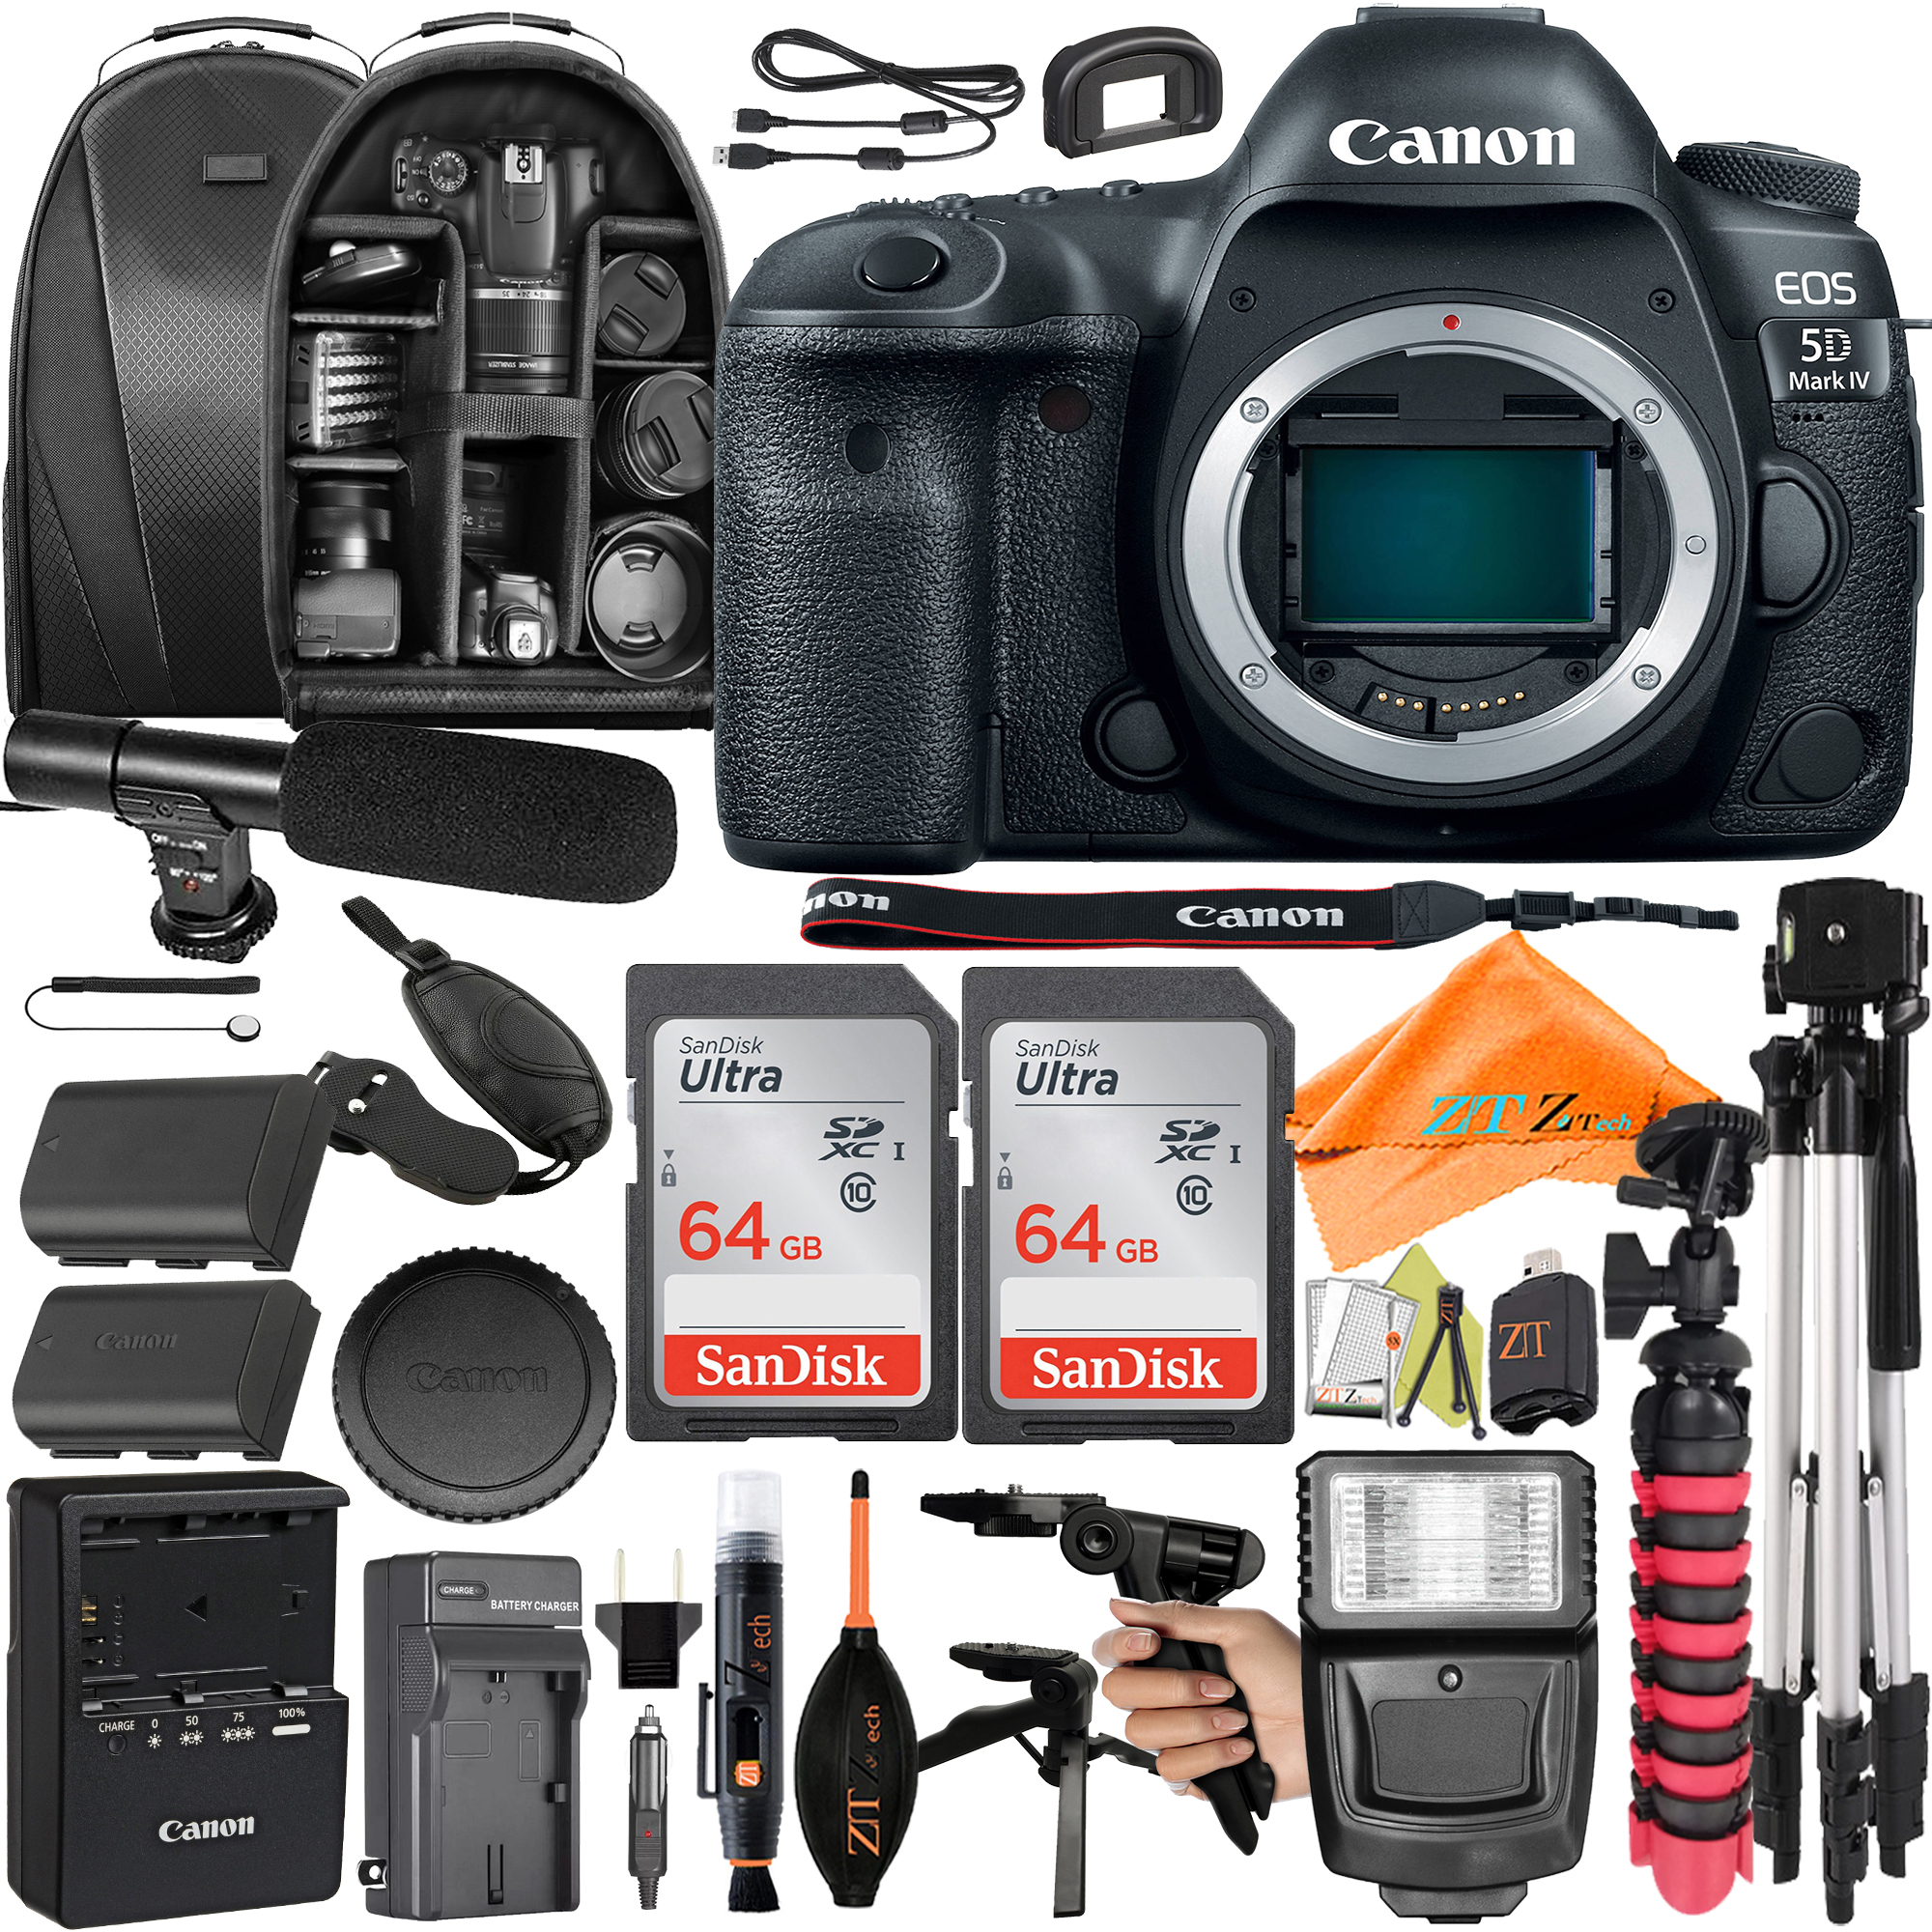 Canon EOS 5D Mark IV DSLR Camera (Body Only) with SanDisk 64GB + Backpack Case + Microphone + ZeeTech Accessory Bundle